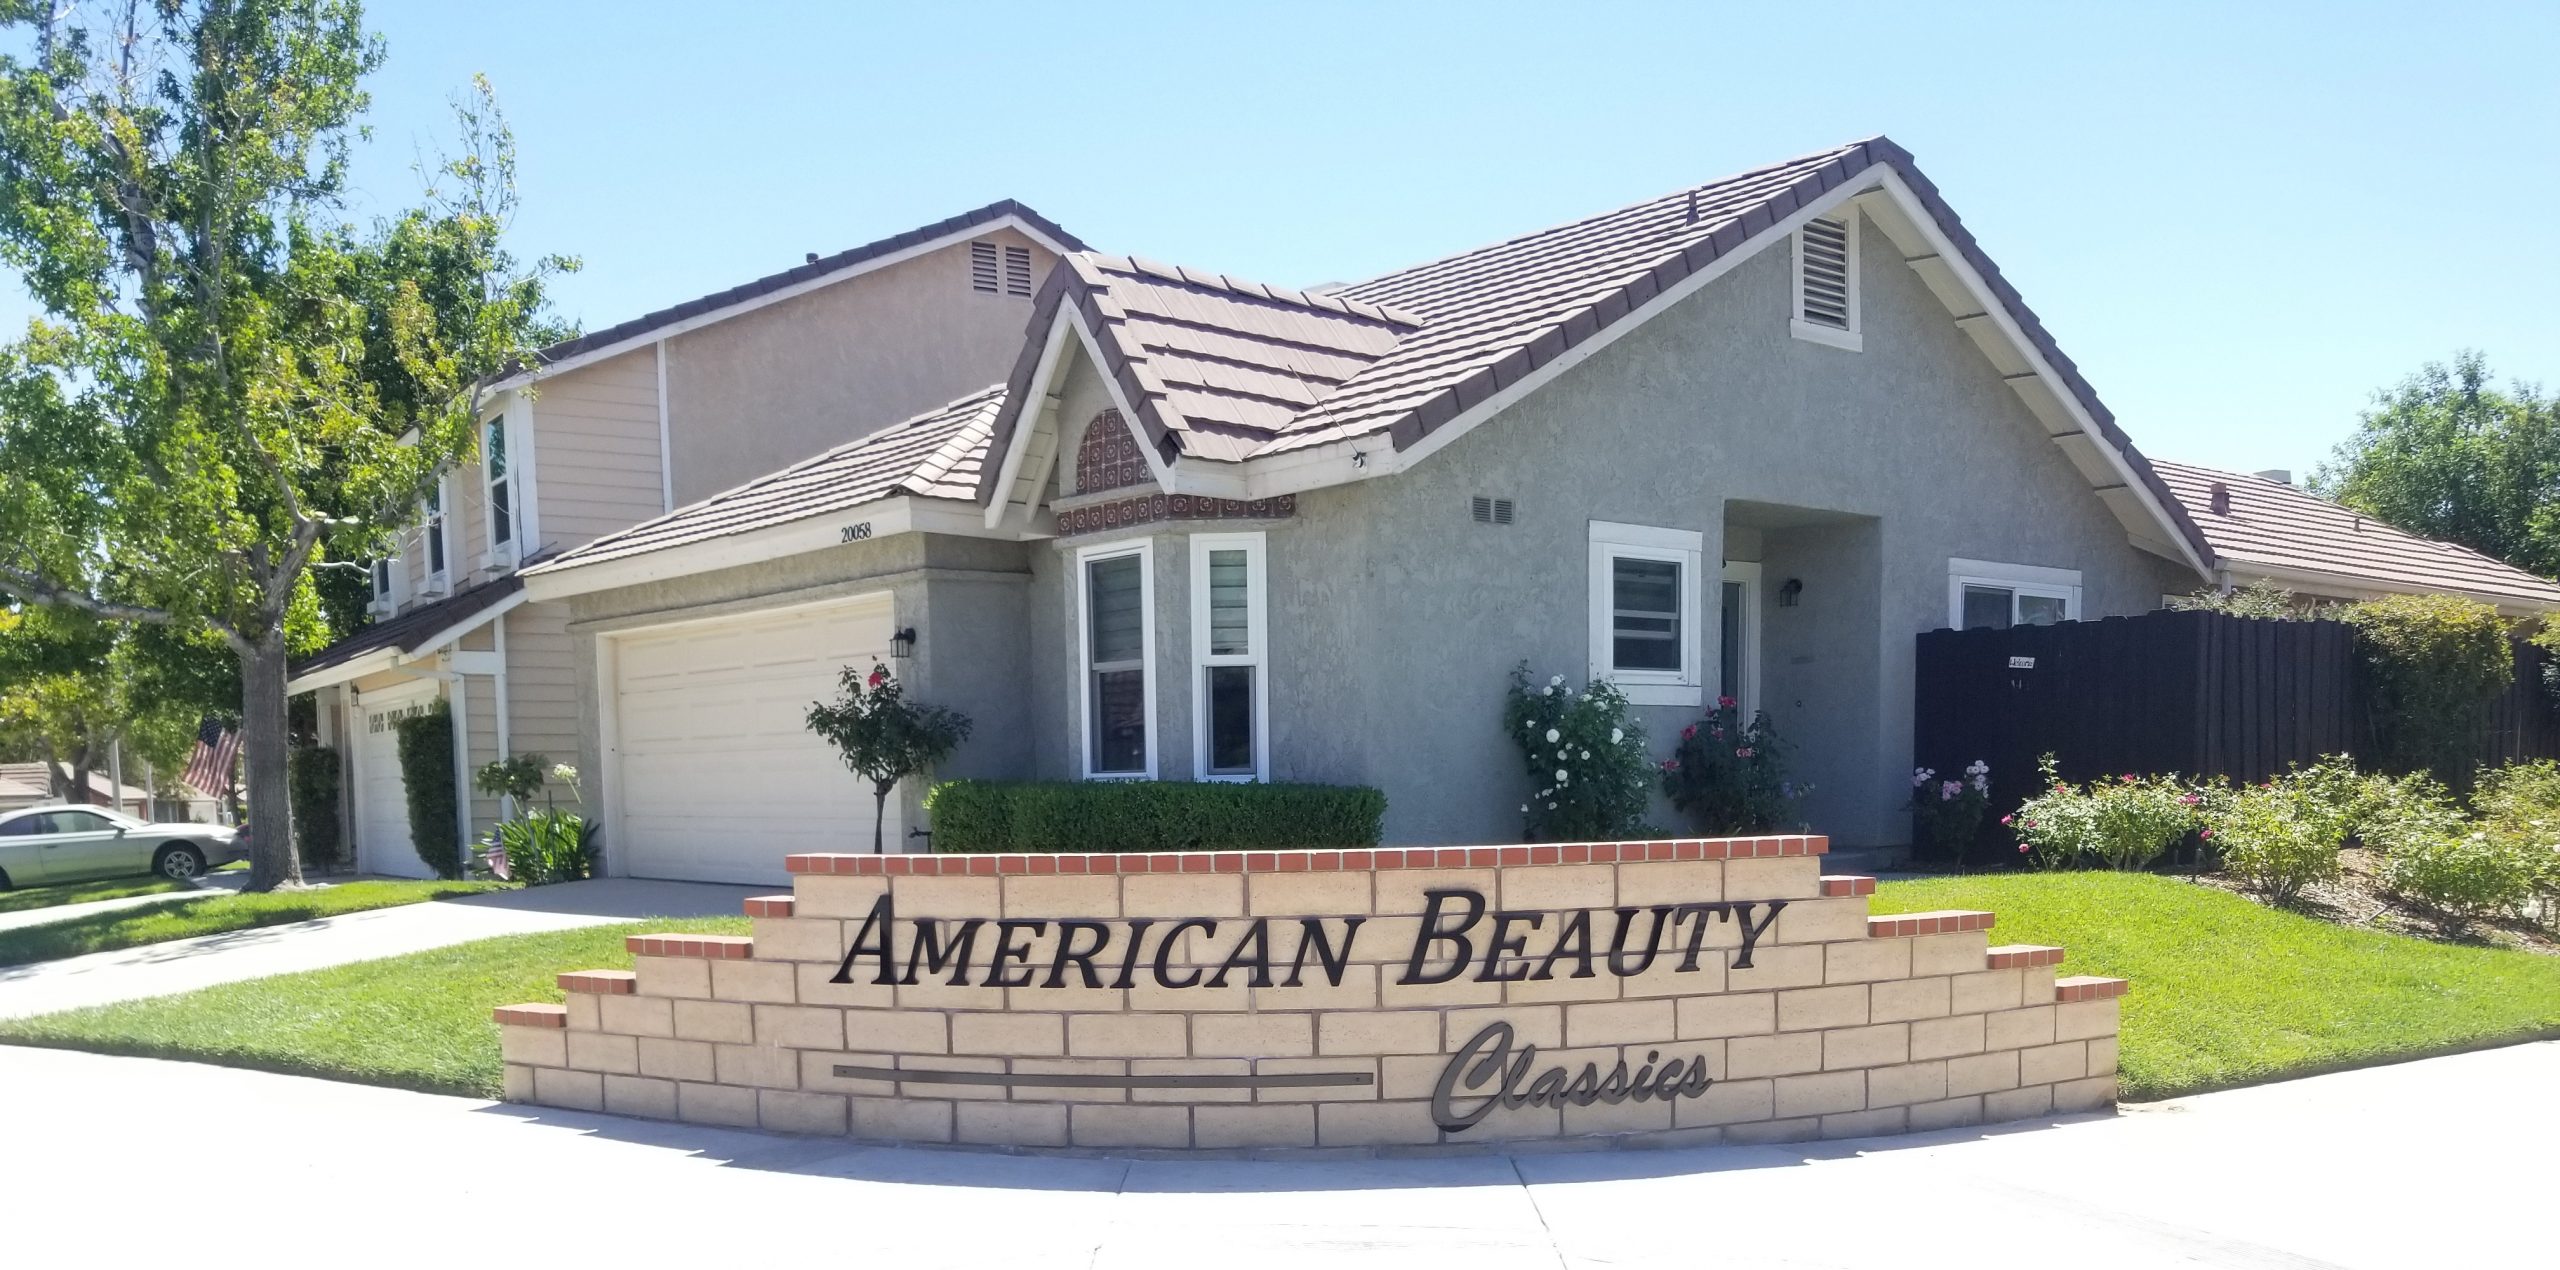 You are currently viewing Streetside Dimensional Letters for American Beauty Classics in Canyon Country